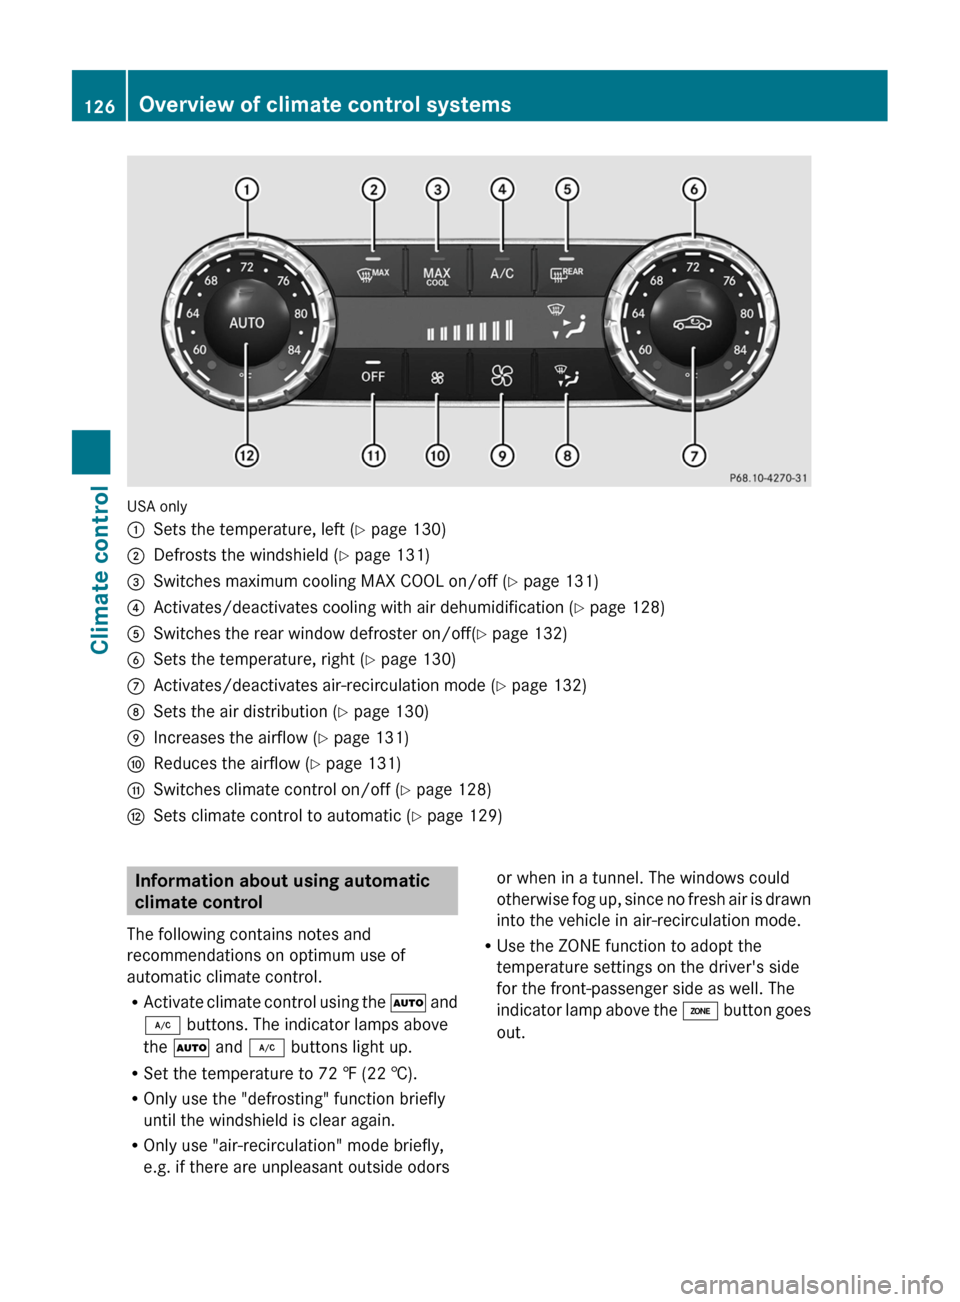 MERCEDES-BENZ CLS-Class 2013 W218 Owners Manual USA only
:
Sets the temperature, left ( Y page 130)
; Defrosts the windshield ( Y page 131)
= Switches maximum cooling MAX COOL on/off ( Y page 131)
? Activates/deactivates cooling with air dehumidifi